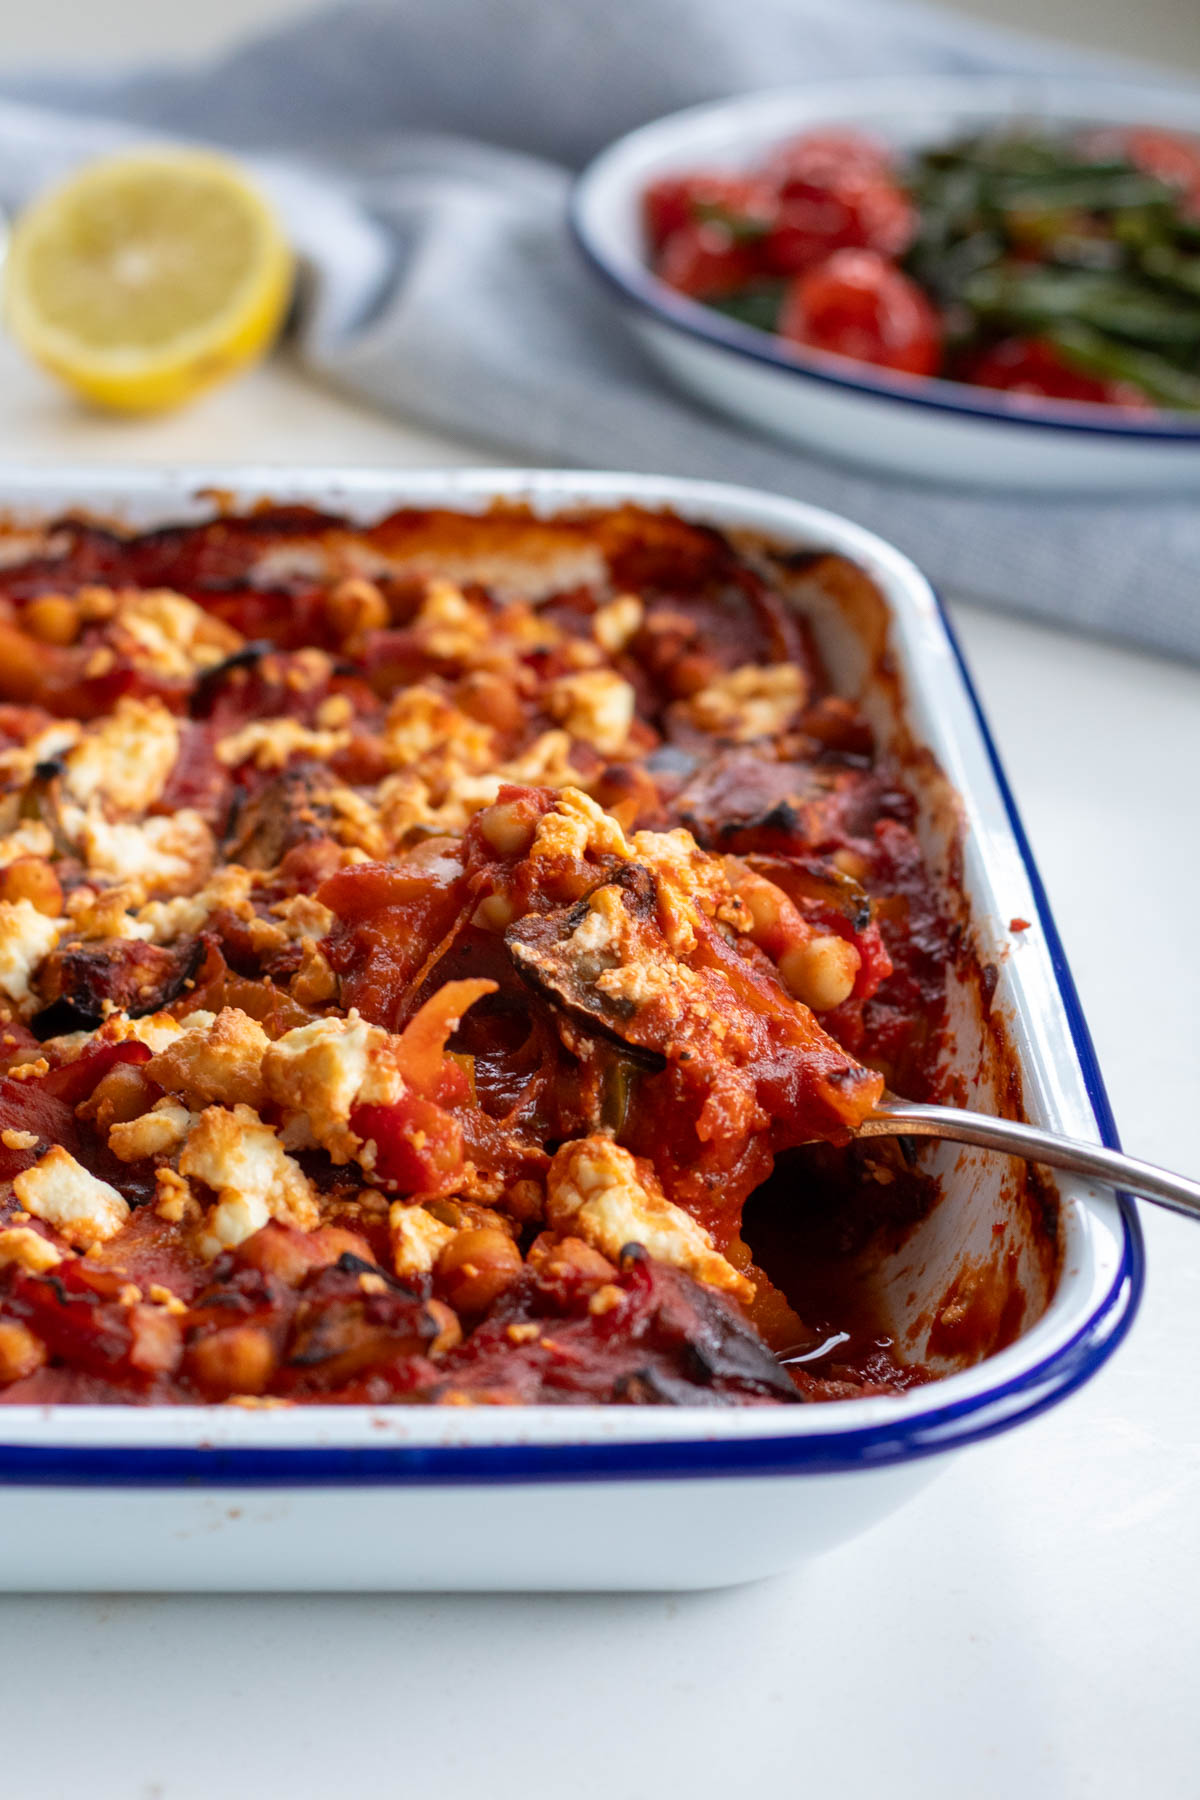 Aubergine Feta and Tomato bake in a roasting pan with a spoon lifting some out from the corner